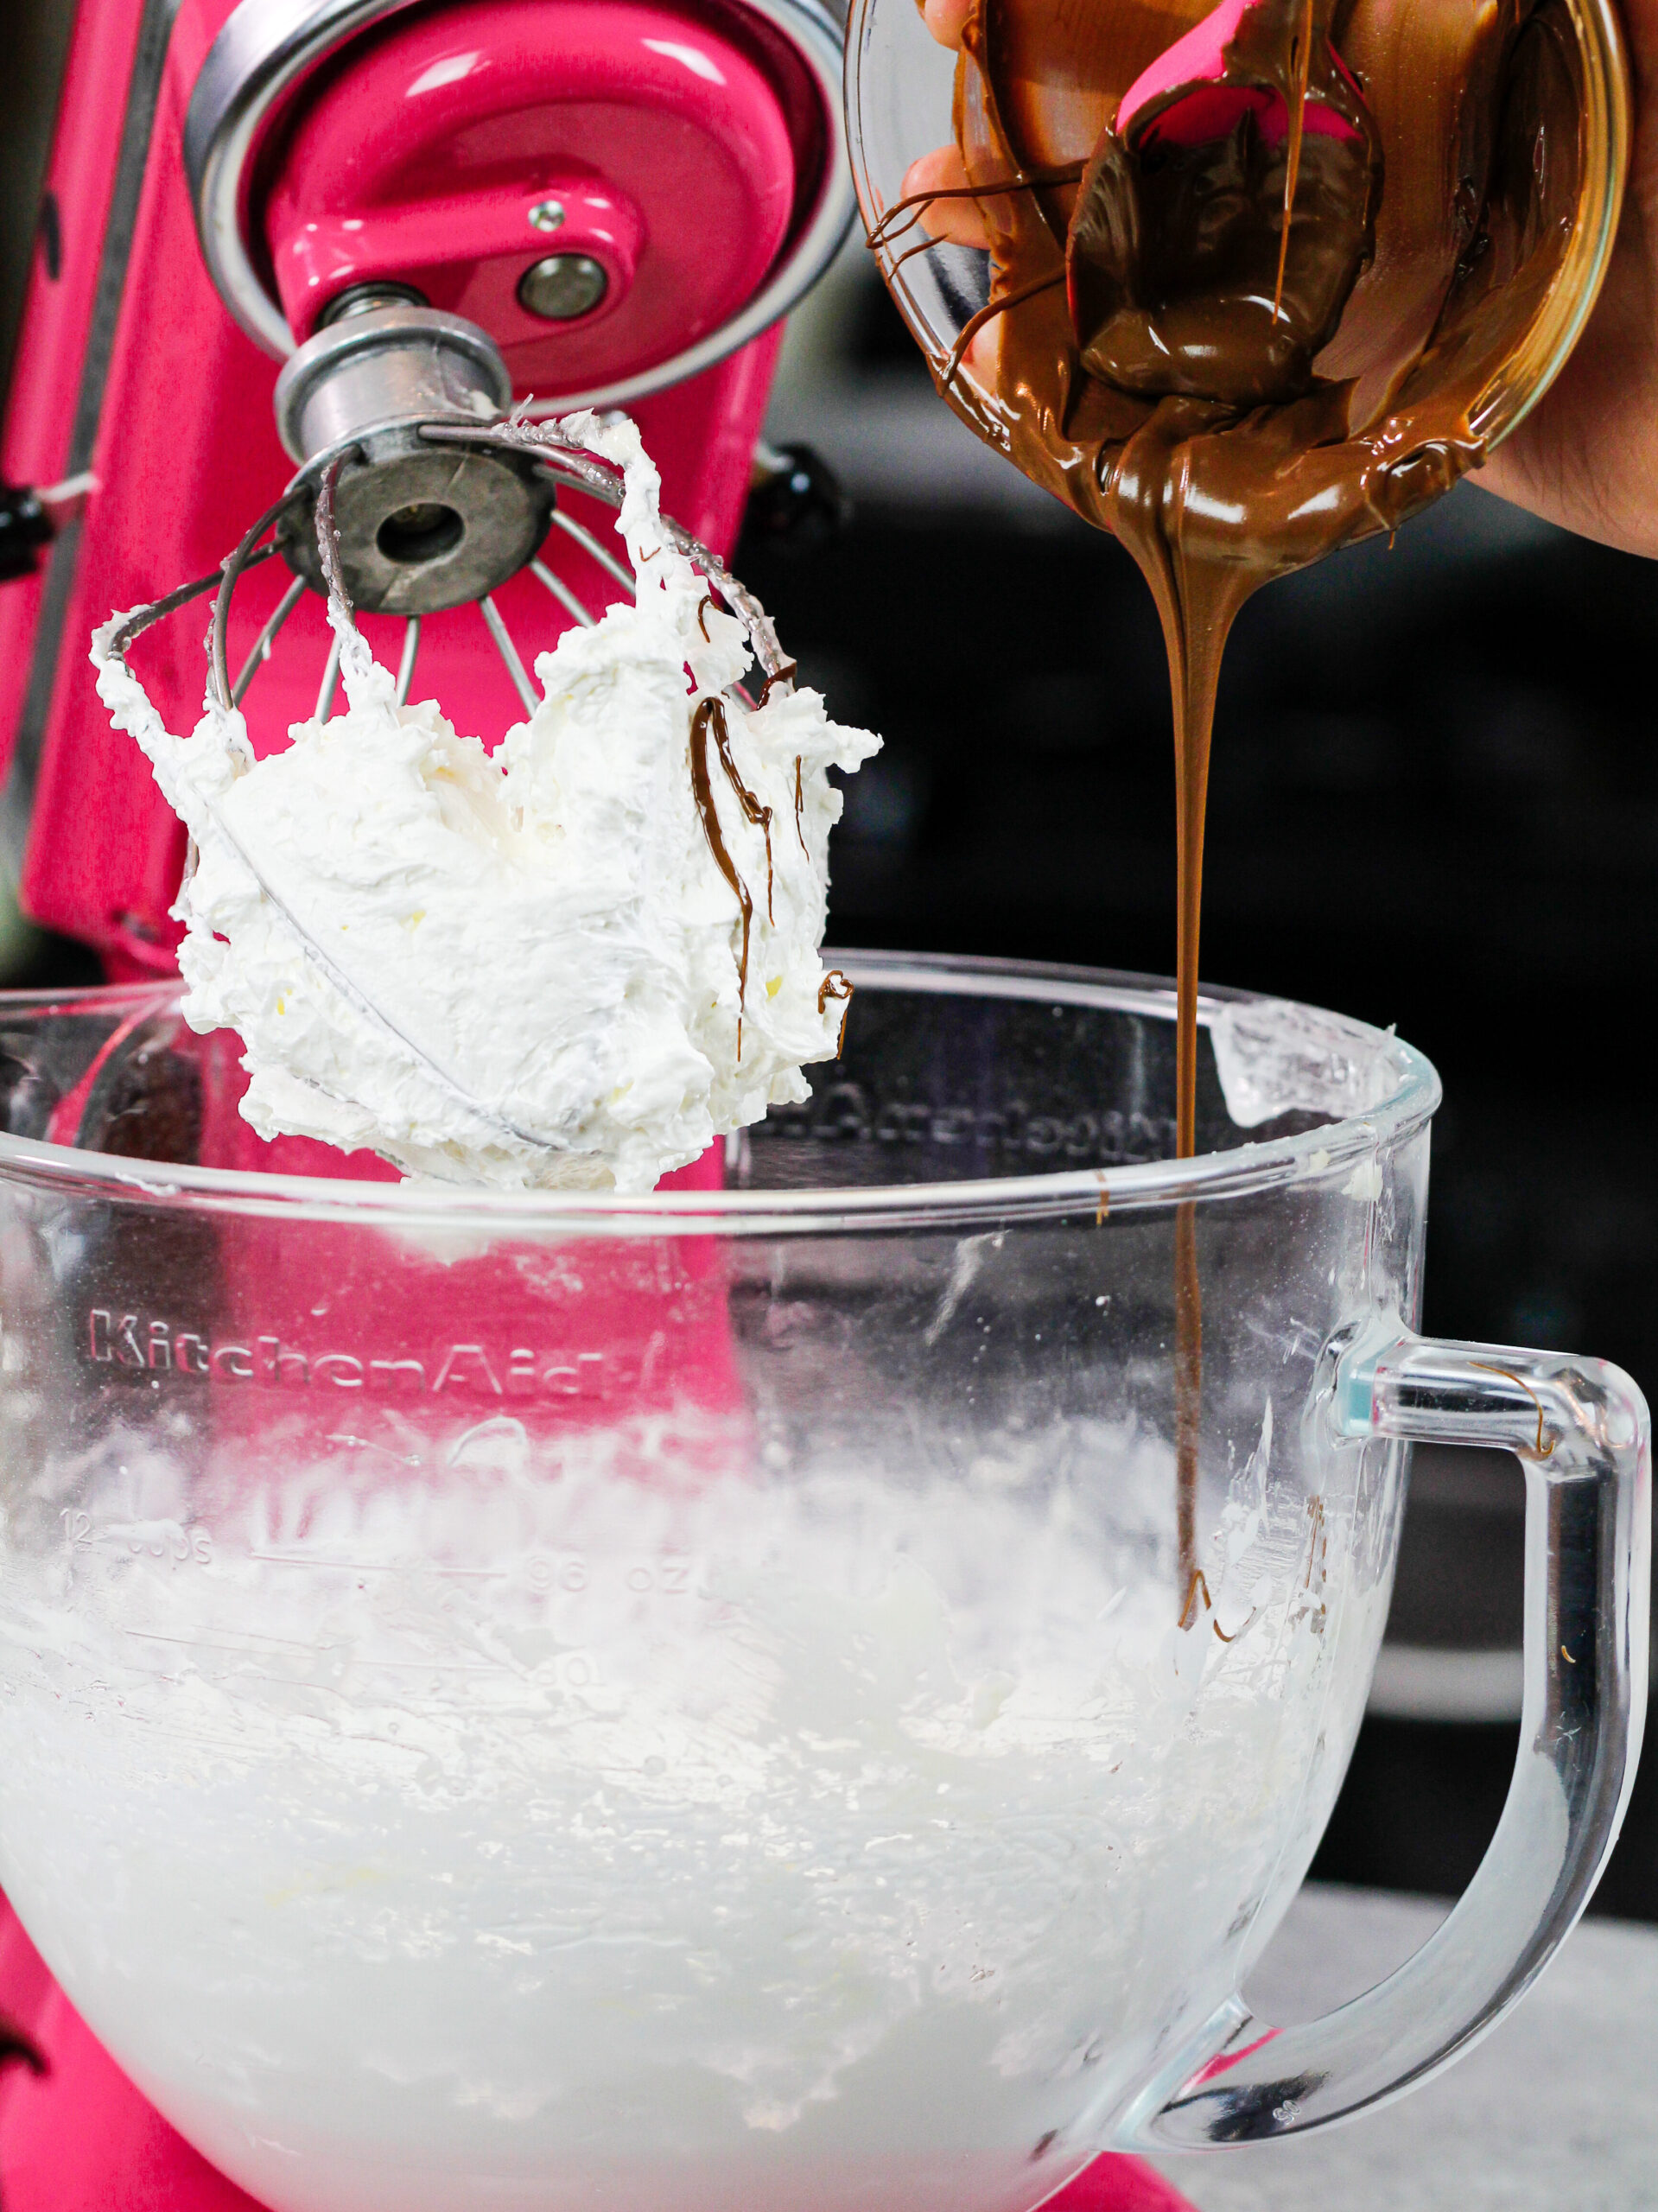 image of chocolate being poured into a stand mixer to make chocolate Italian meringue buttercream